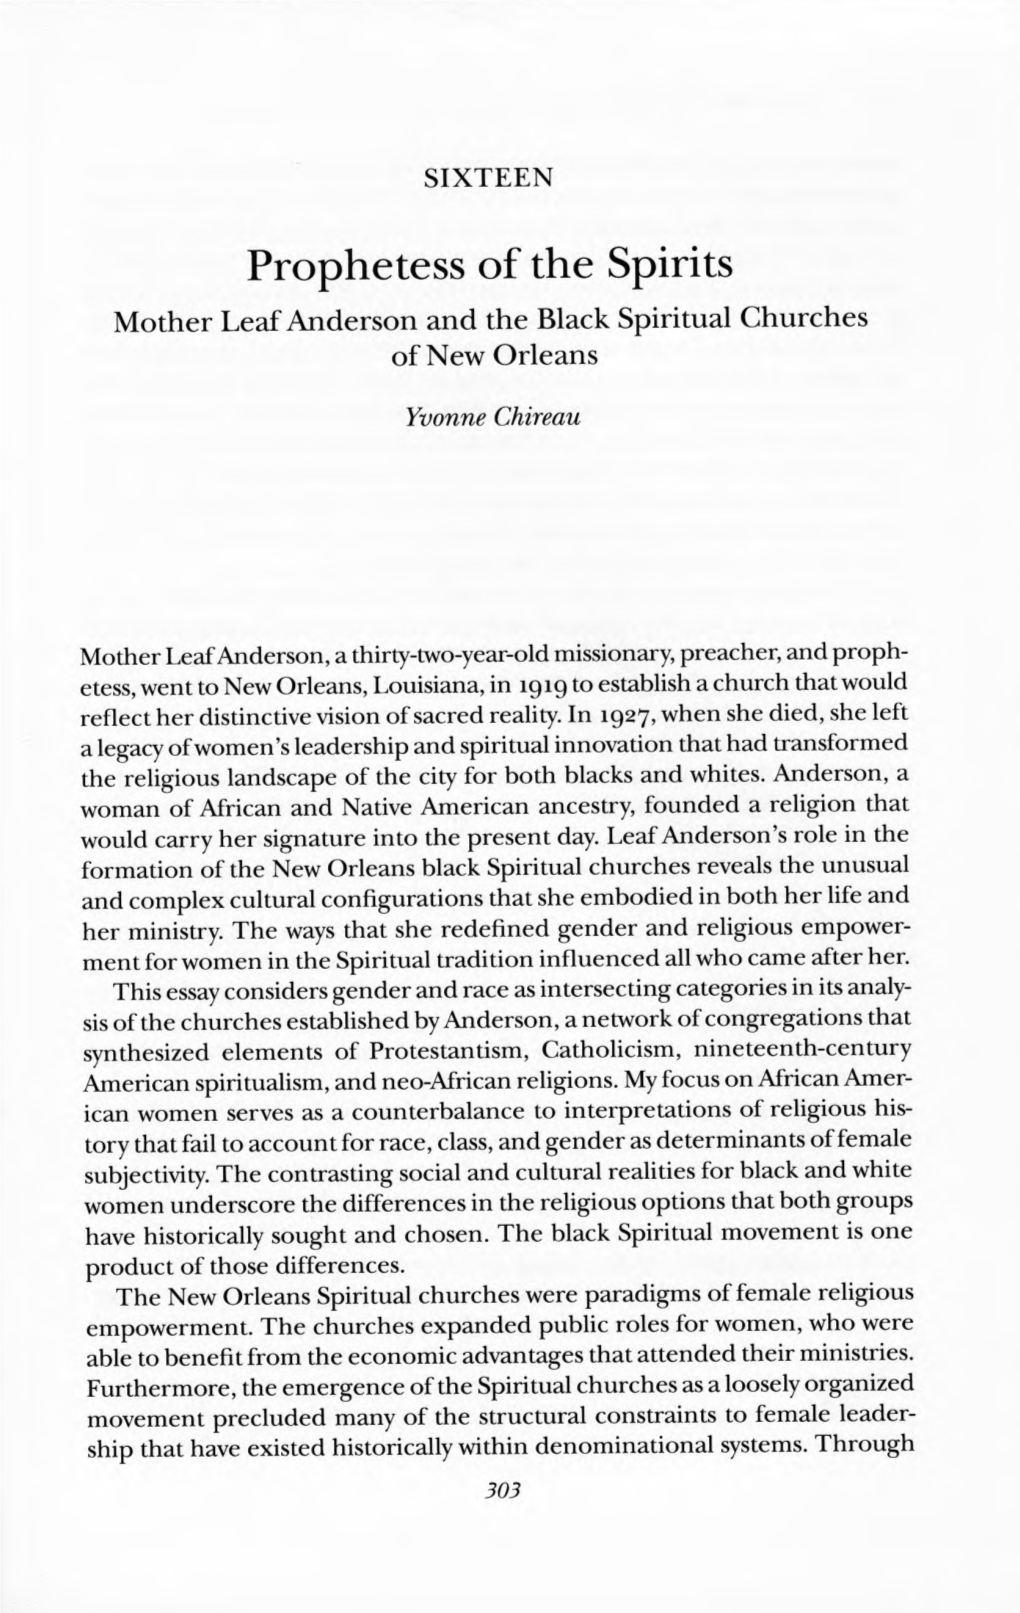 Prophetess of the Spirits: Mother Leaf Anderson and the Black Spiritual Churches of New Orleans